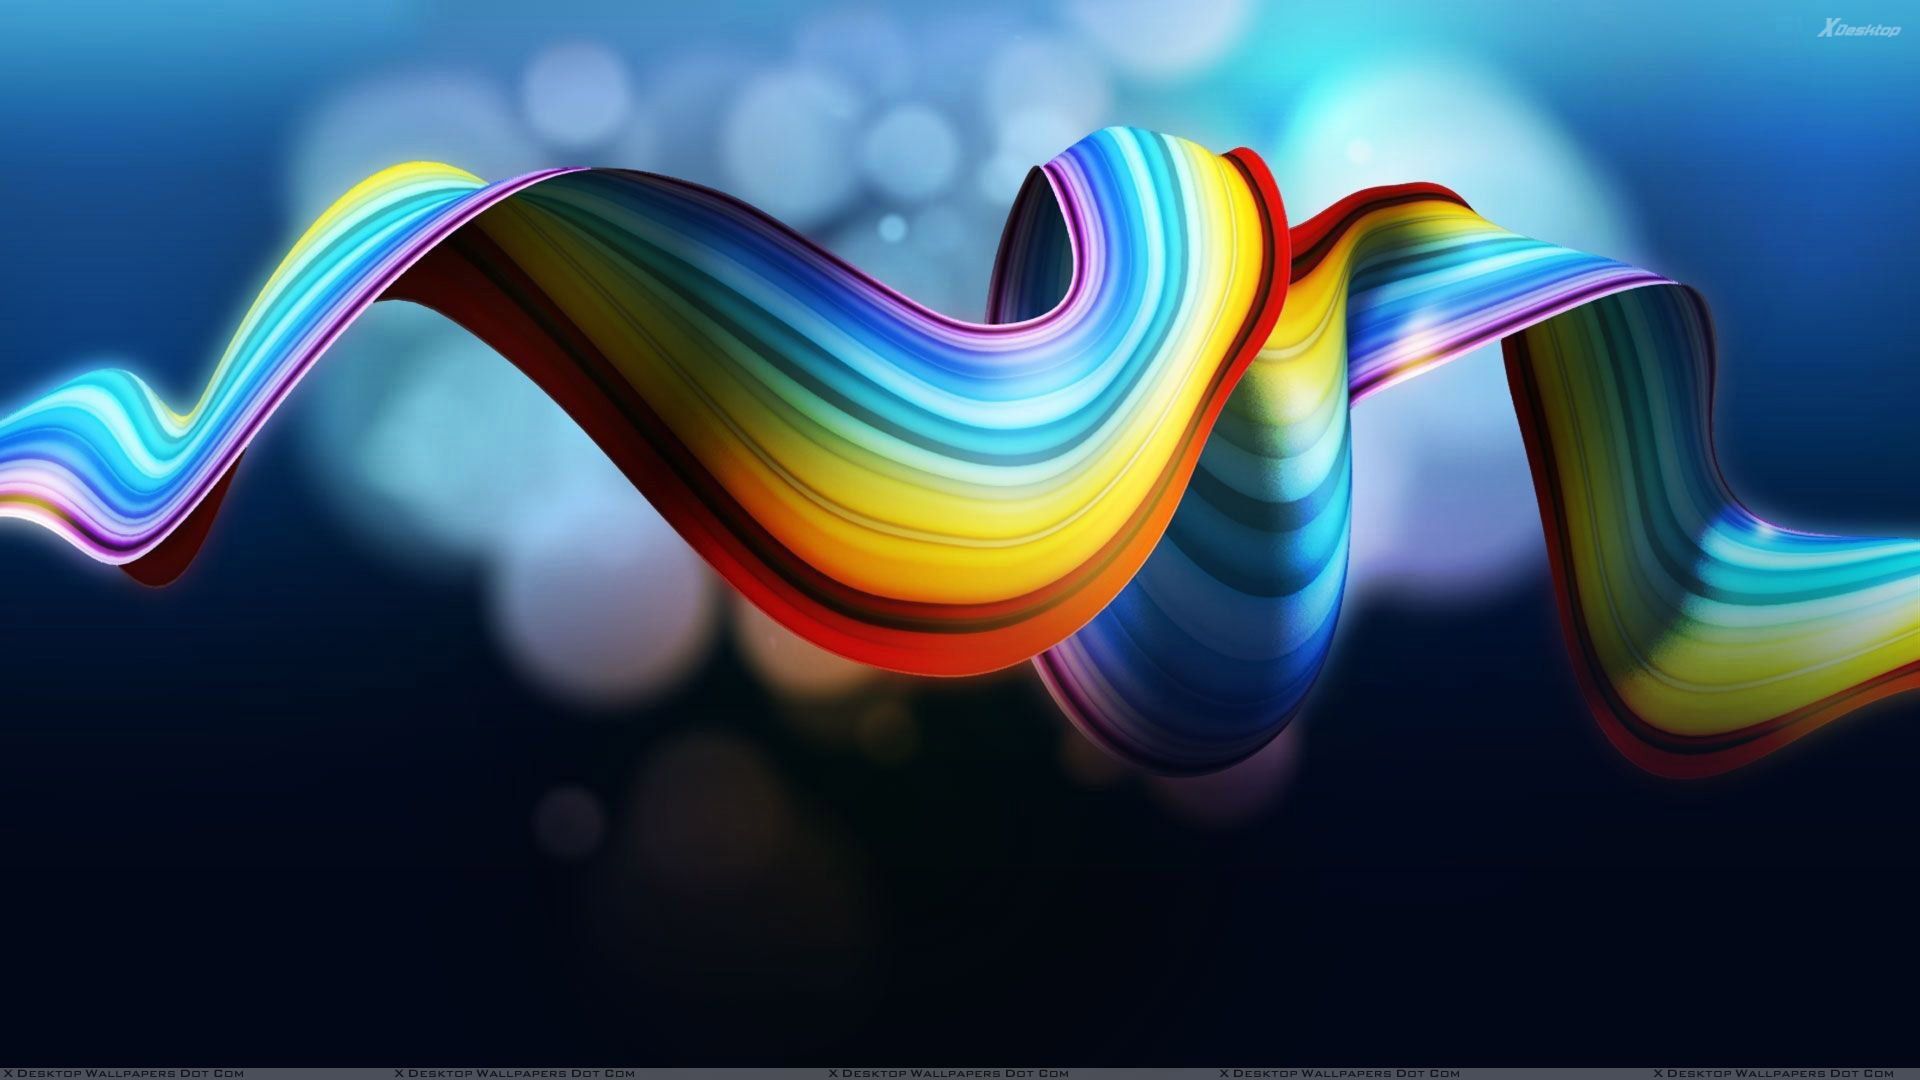 Hd wallpaper rainbow abstract backgrounds